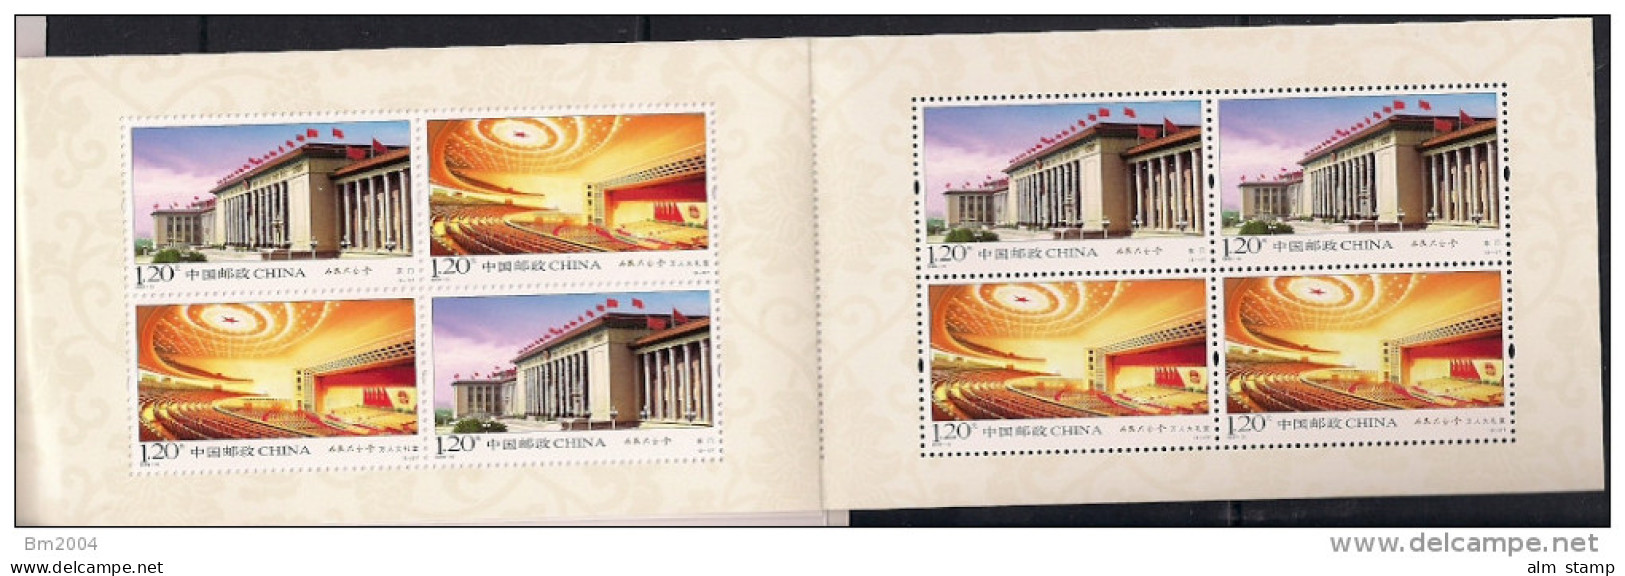 2009 China Mi.  MH SB 38 **MNH  The Great Hall Of The People - Oblitérés